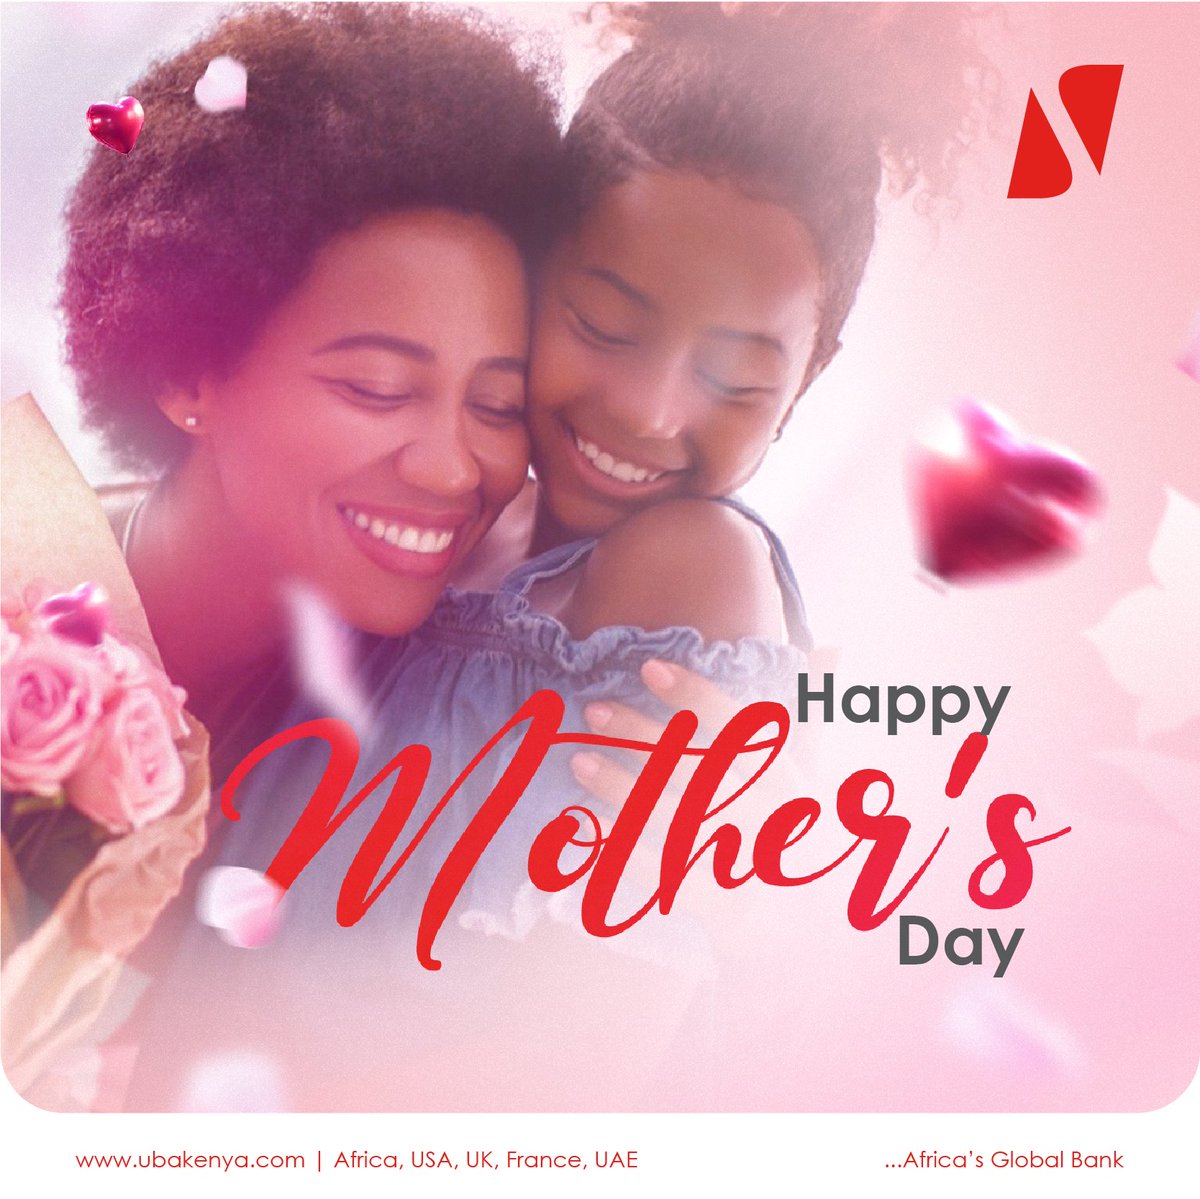 Here's to the incredible moms who make every day brighter, every hug warmer, and every moment more memorable. Happy Mother's Day to all the amazing moms out there!

#MothersDay 
#CelebrateMom
#UBAlove
#UBAKenya